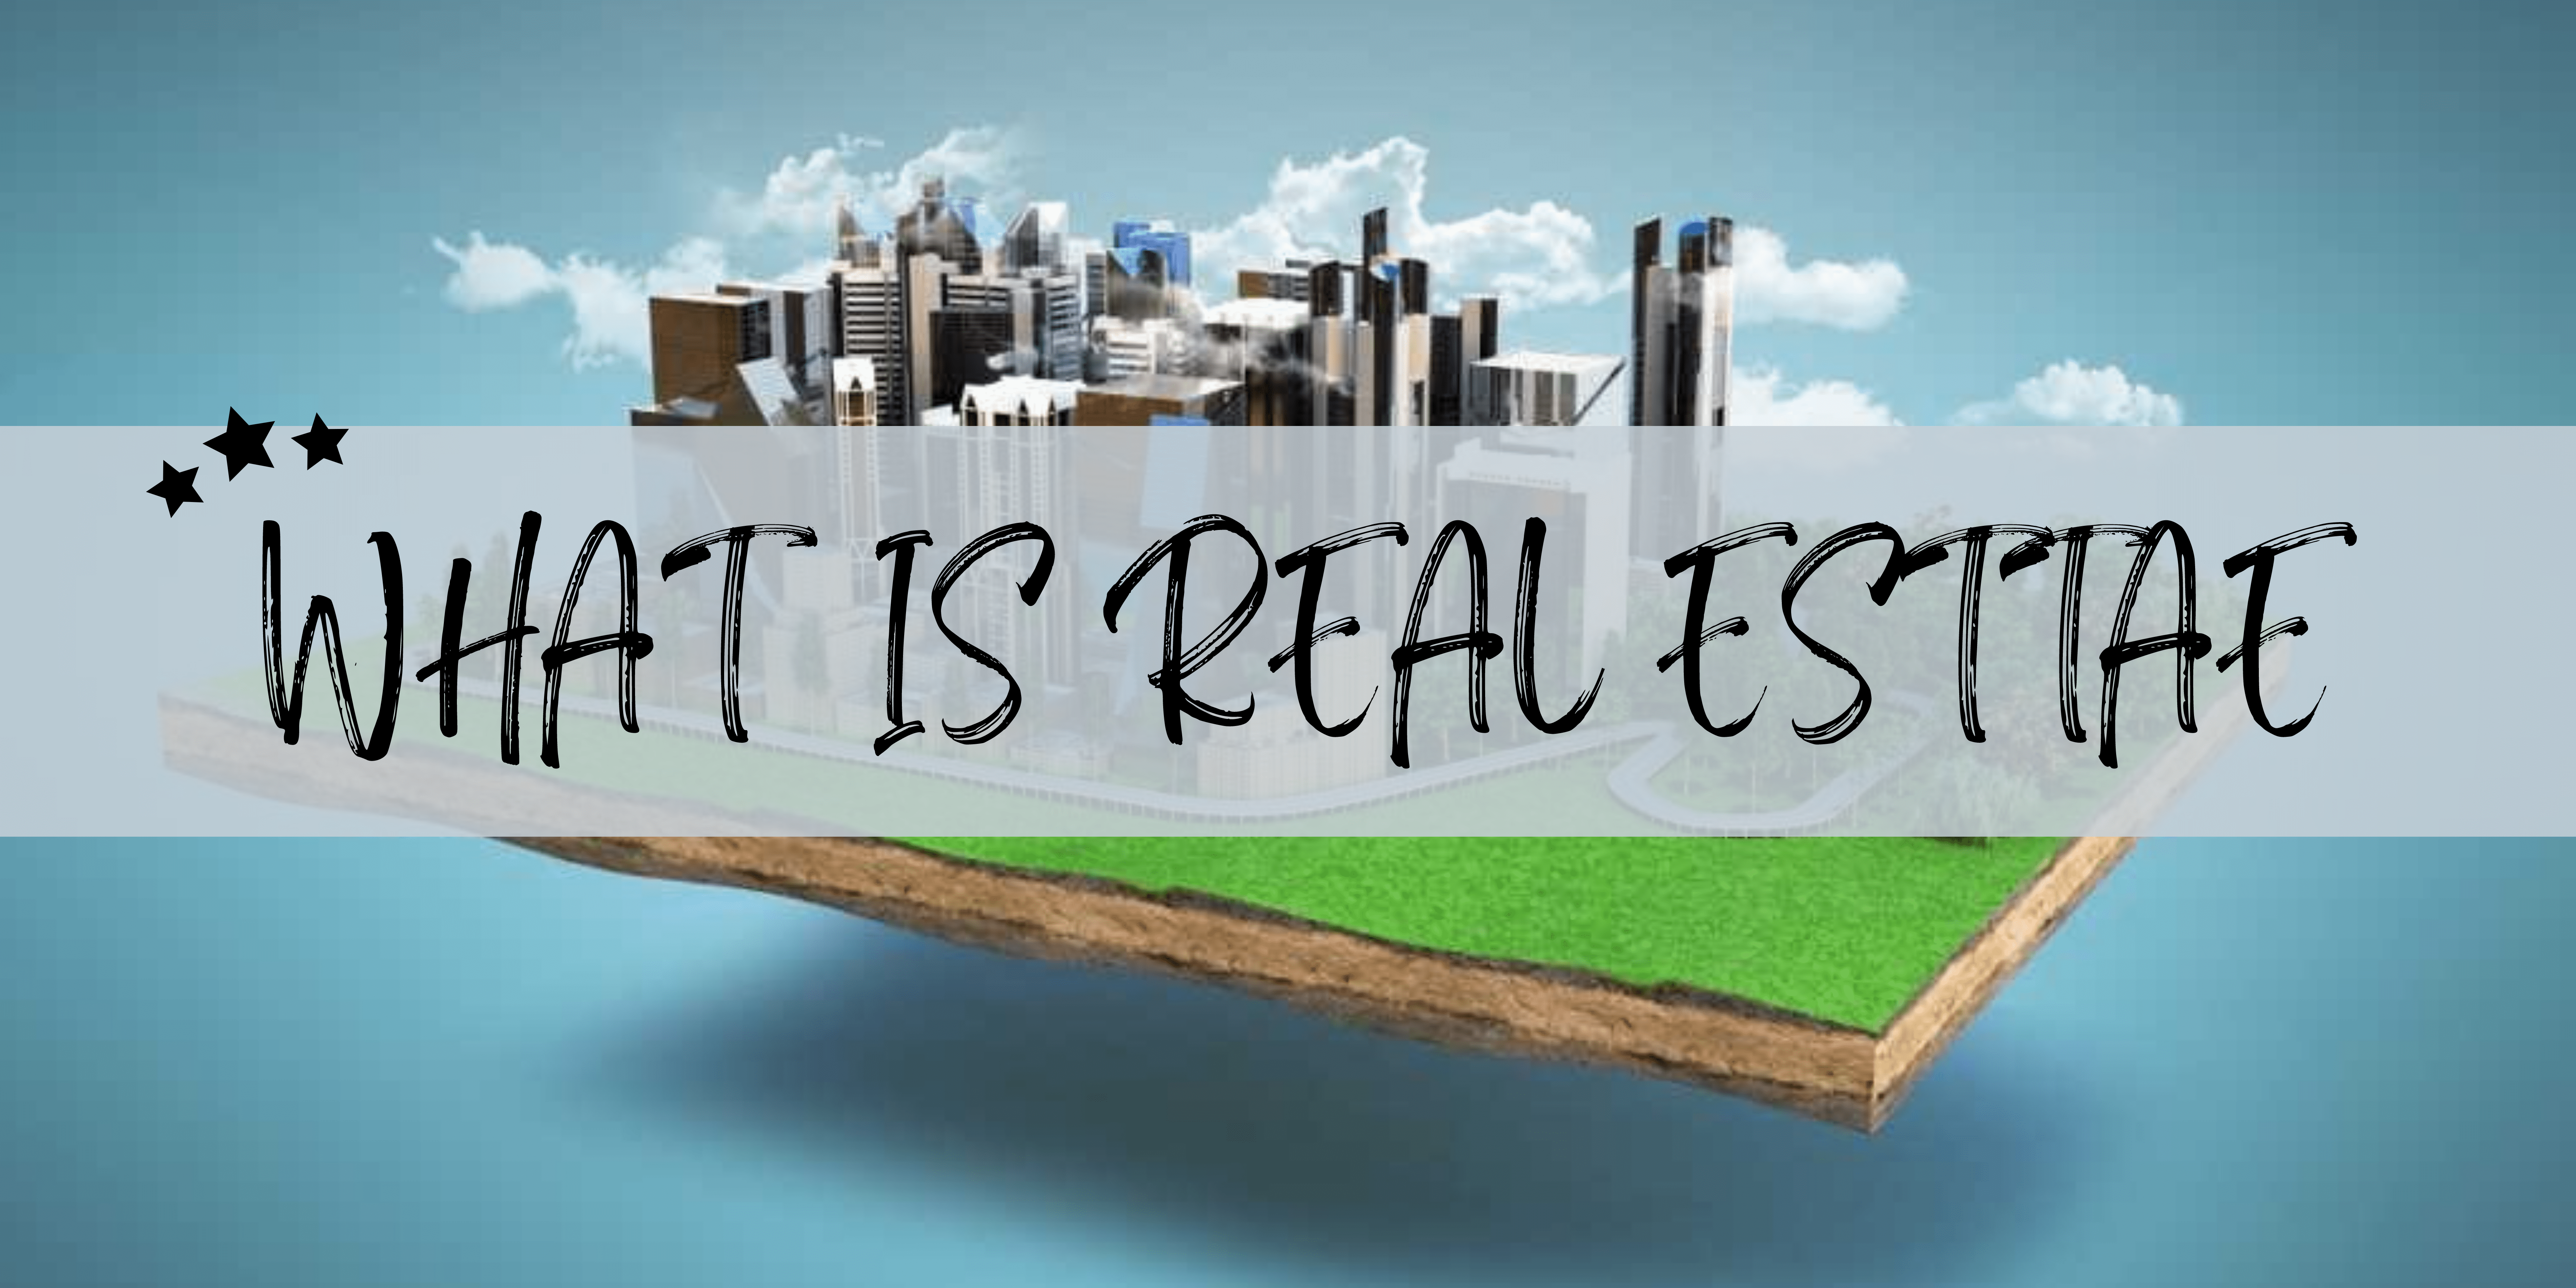 what is real estate